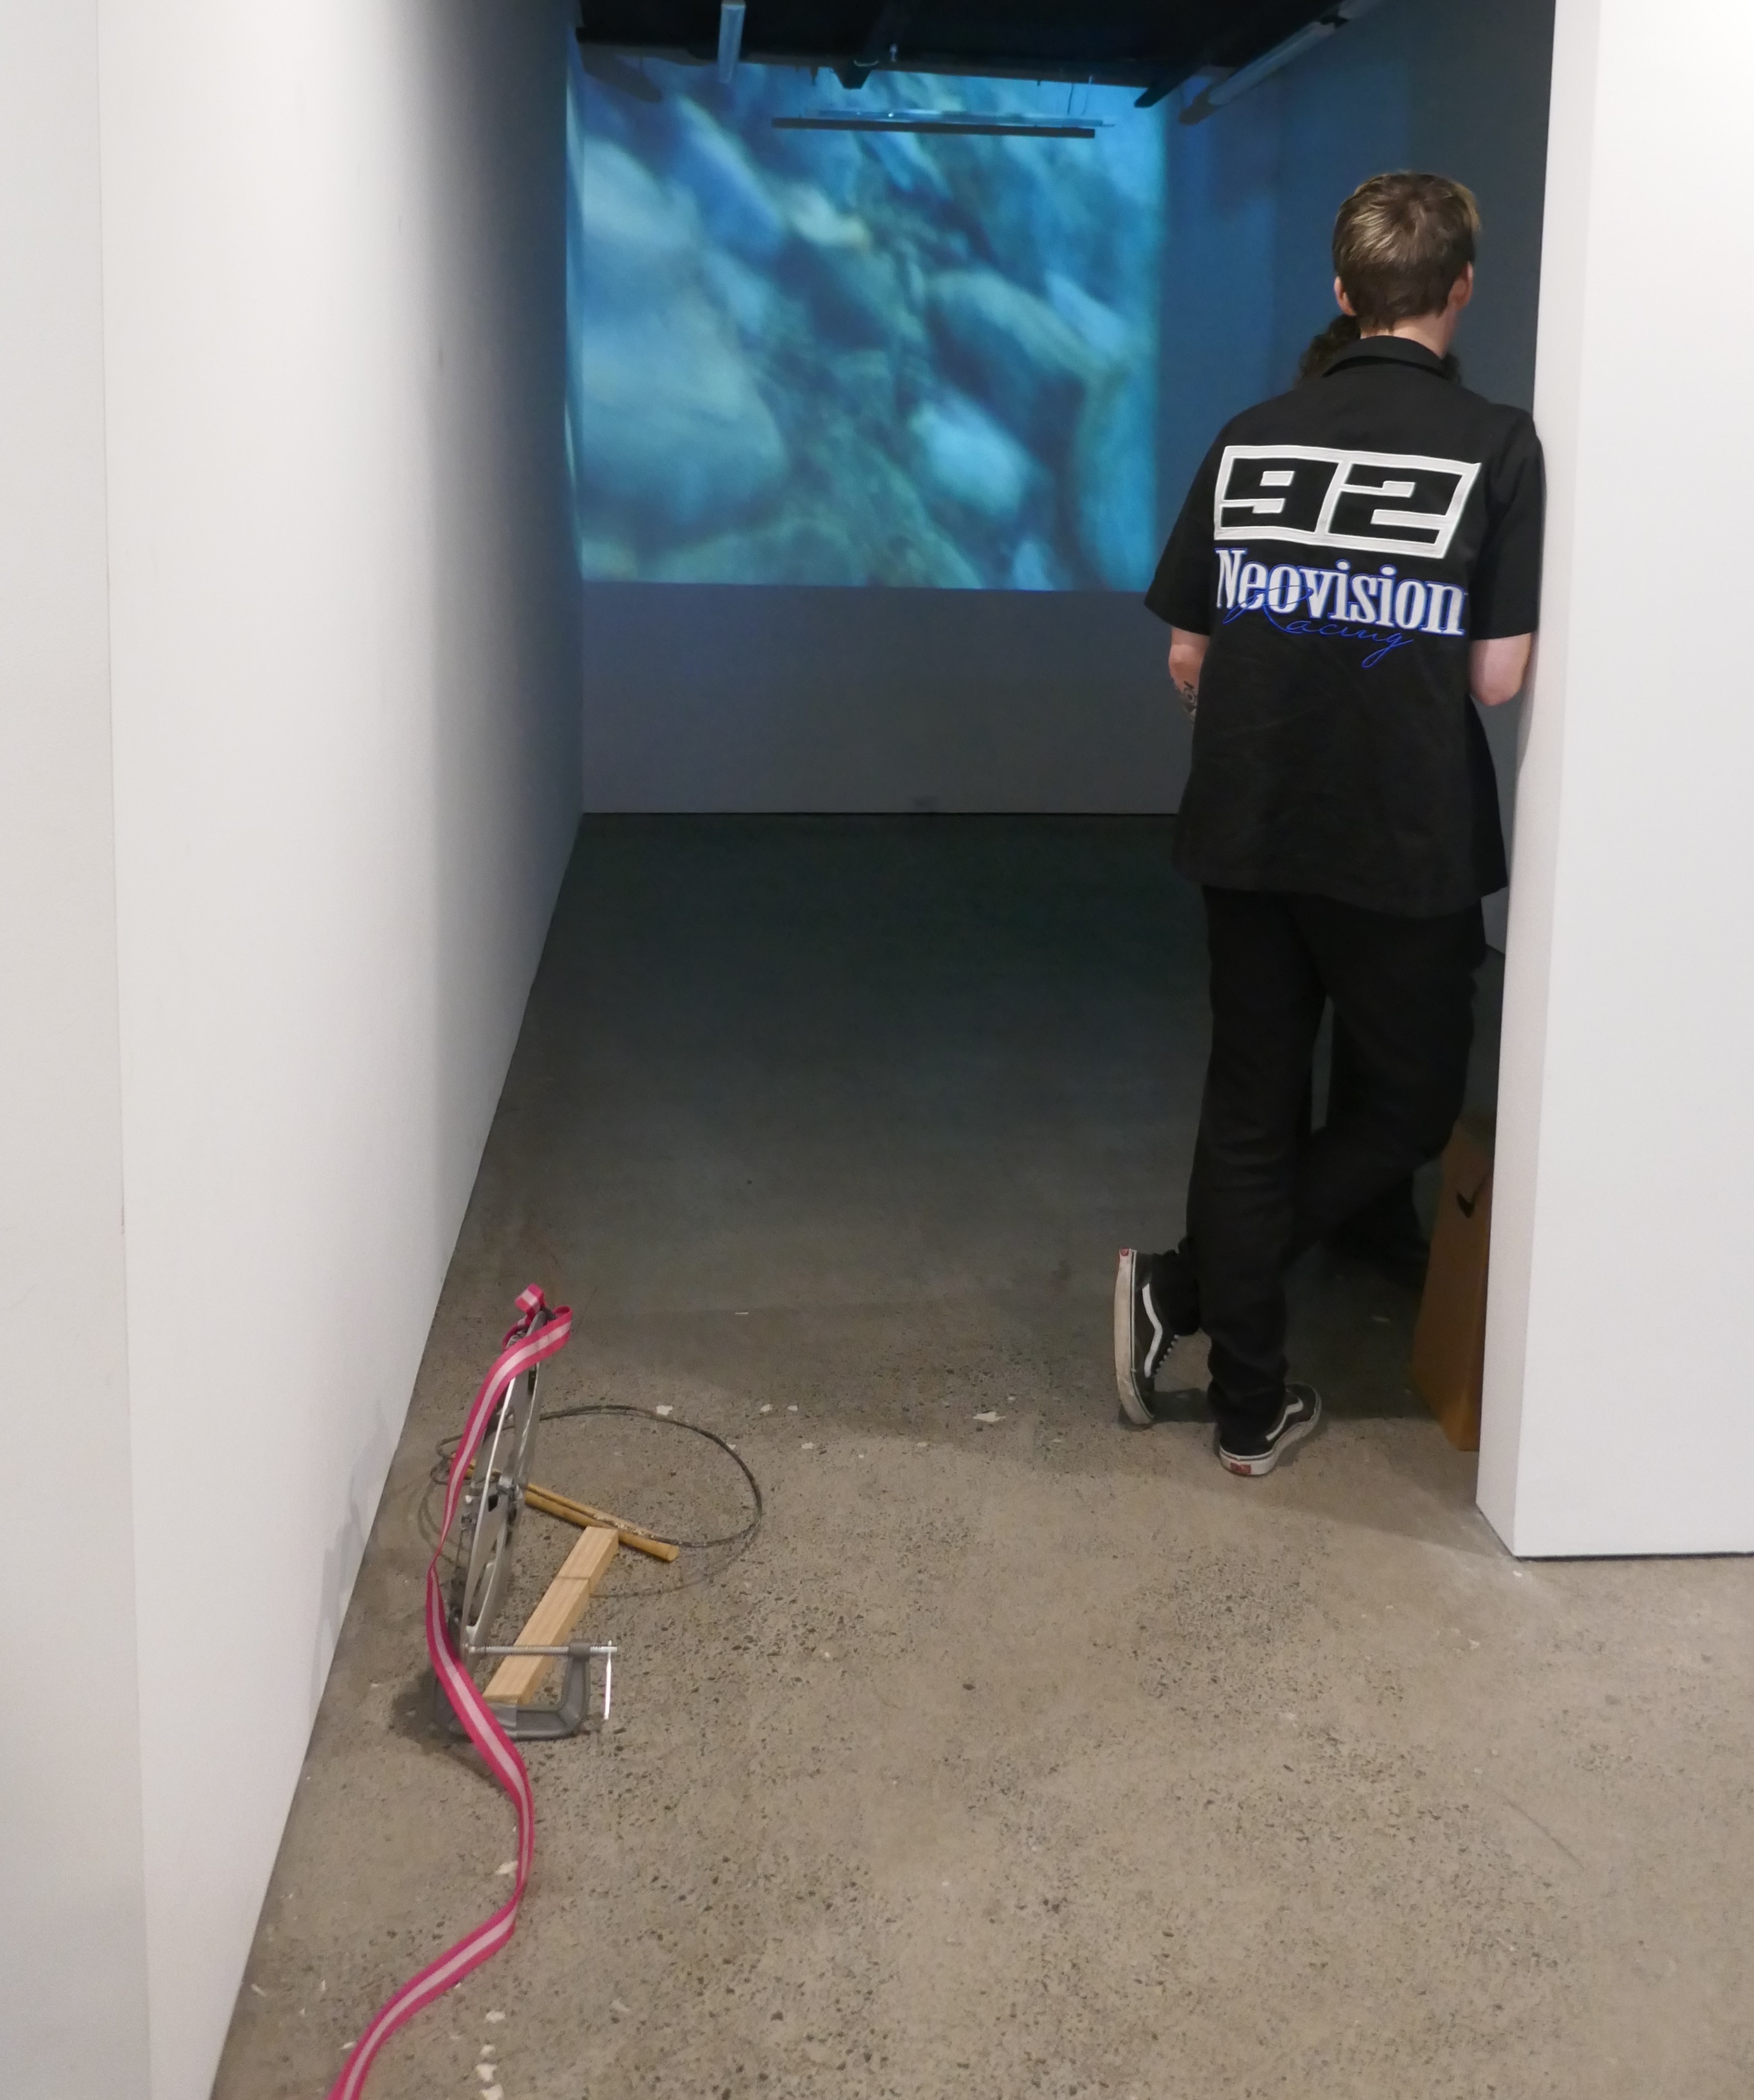 Photo of a person looking at a projection of a video